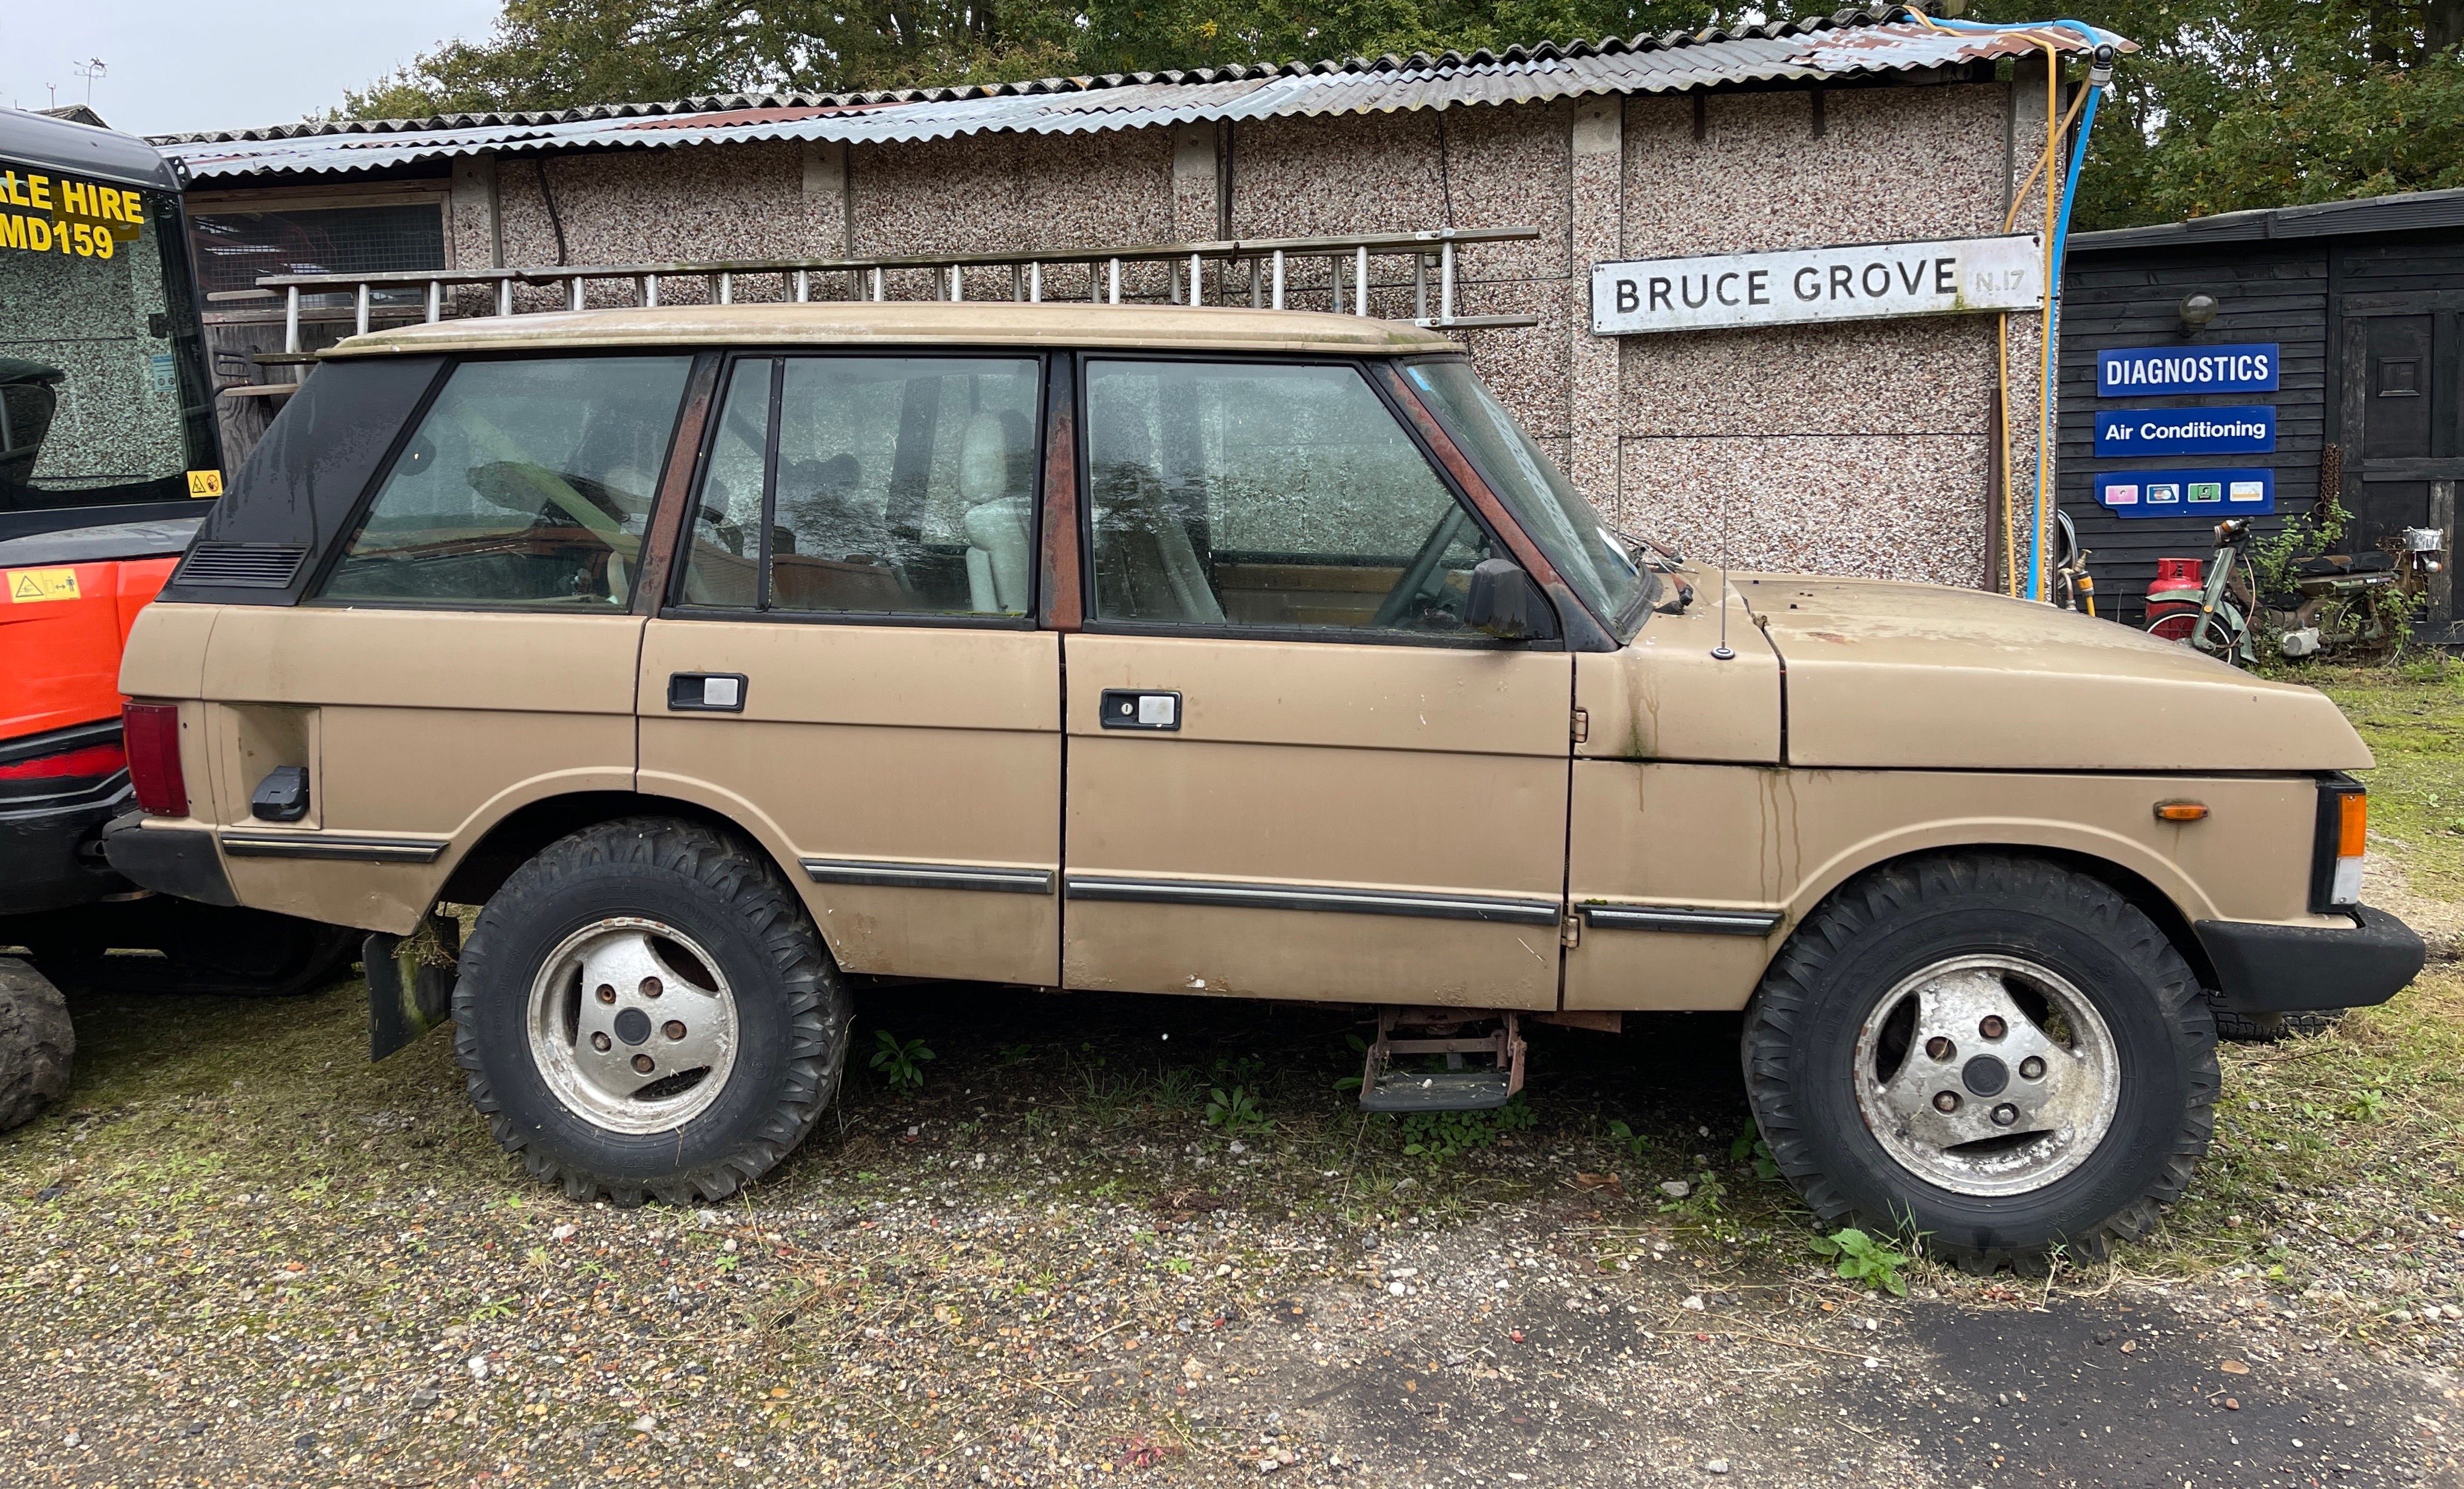 A vintage 2.5 diesel Range Rover with 129,200 miles on the clock. - Image 2 of 3